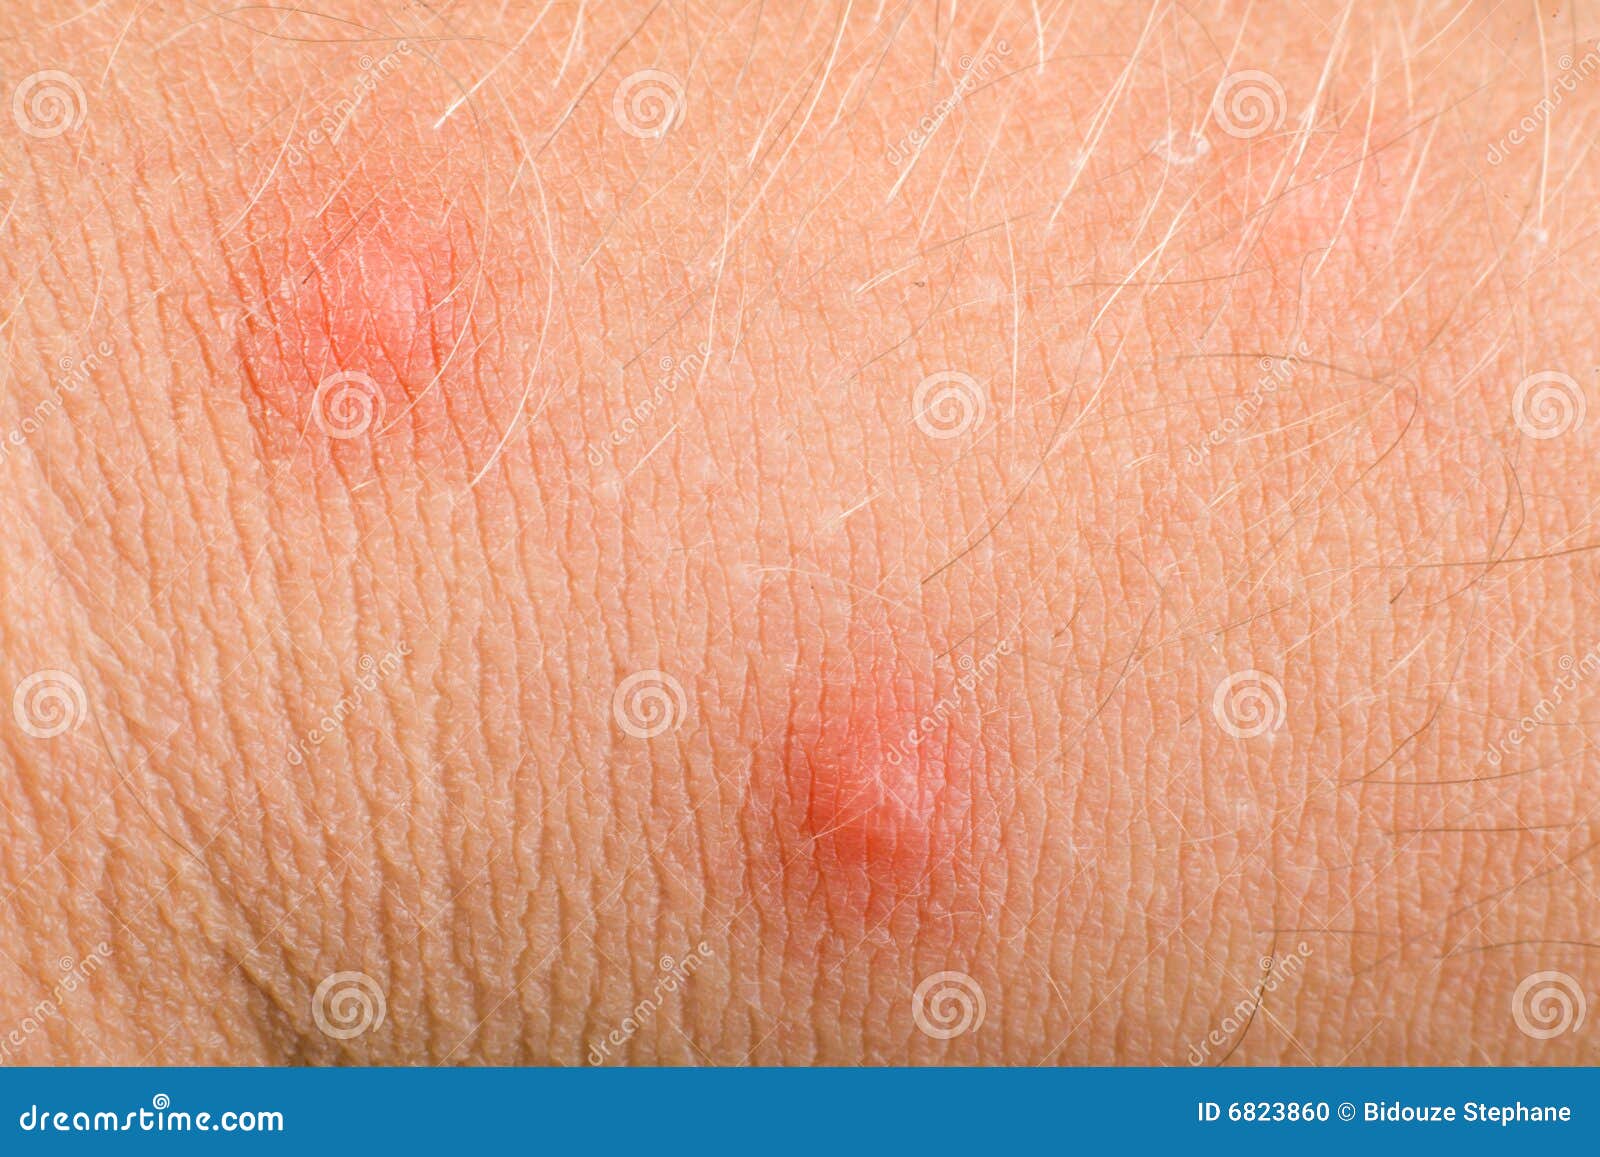 Pimples On Skin Stock Photo - Image: 6823860